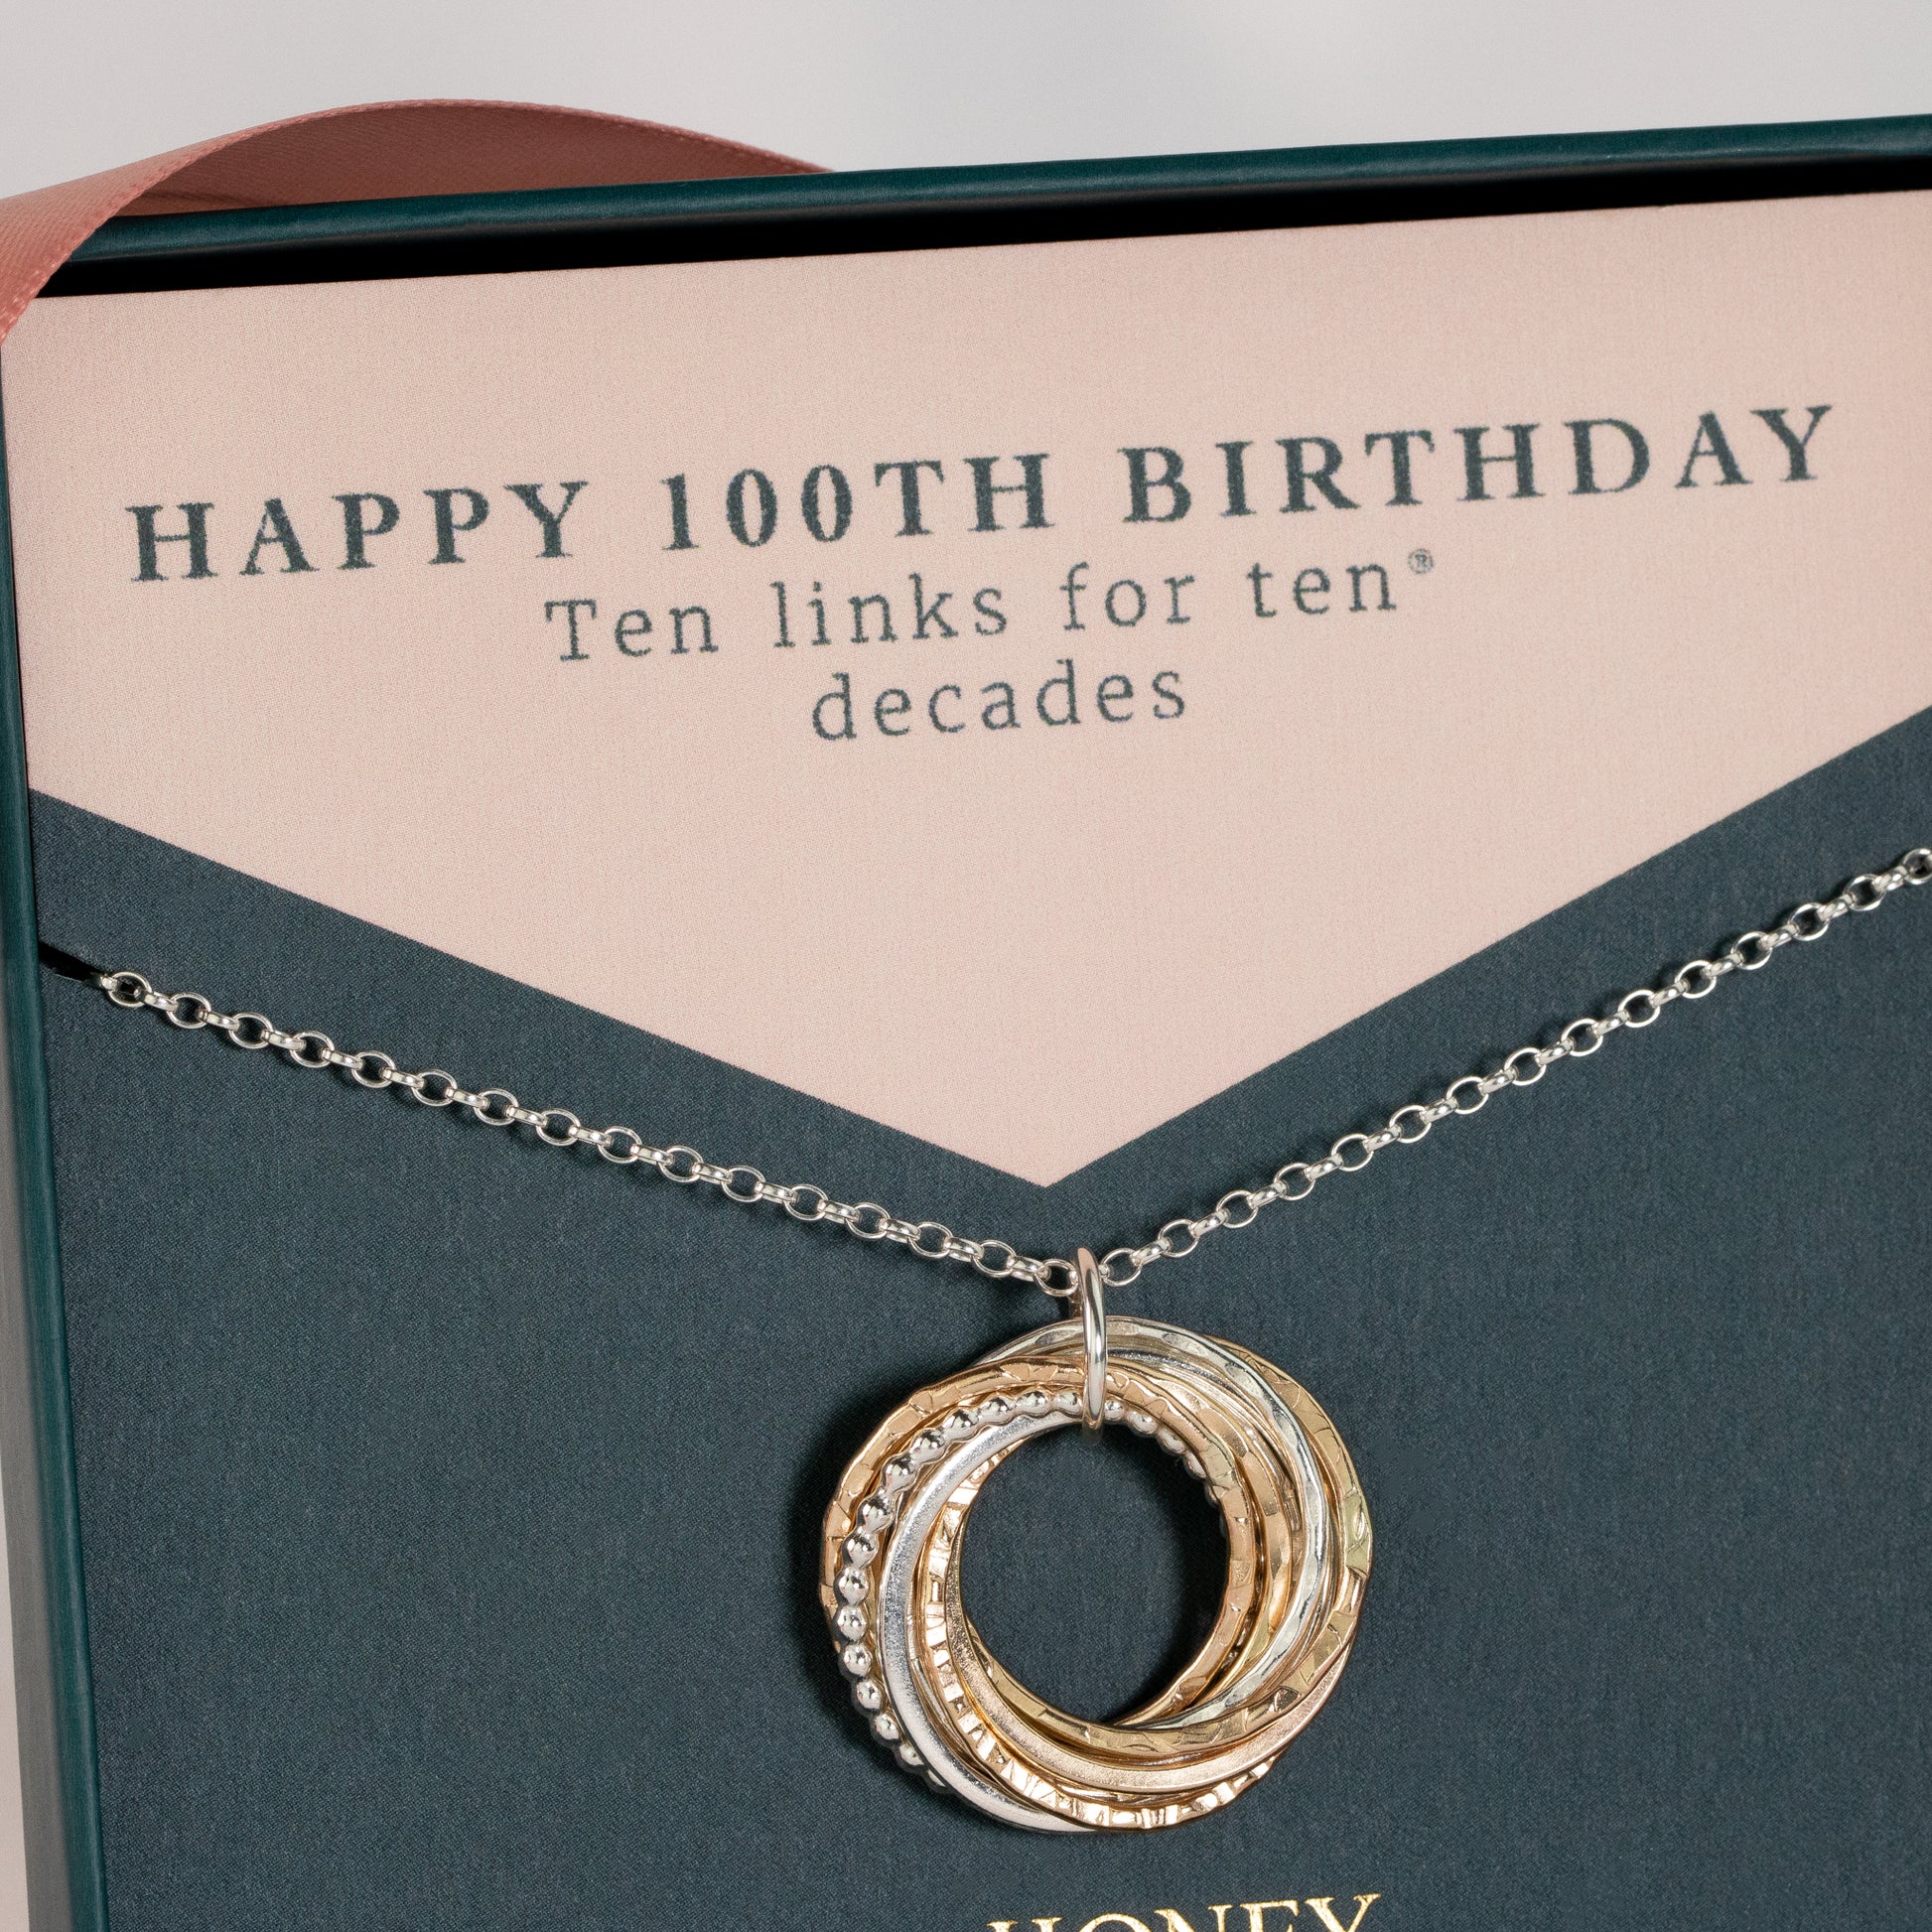 100th Birthday Necklace - The Original 10 Links for 10 Decades Necklace - Silver & Gold